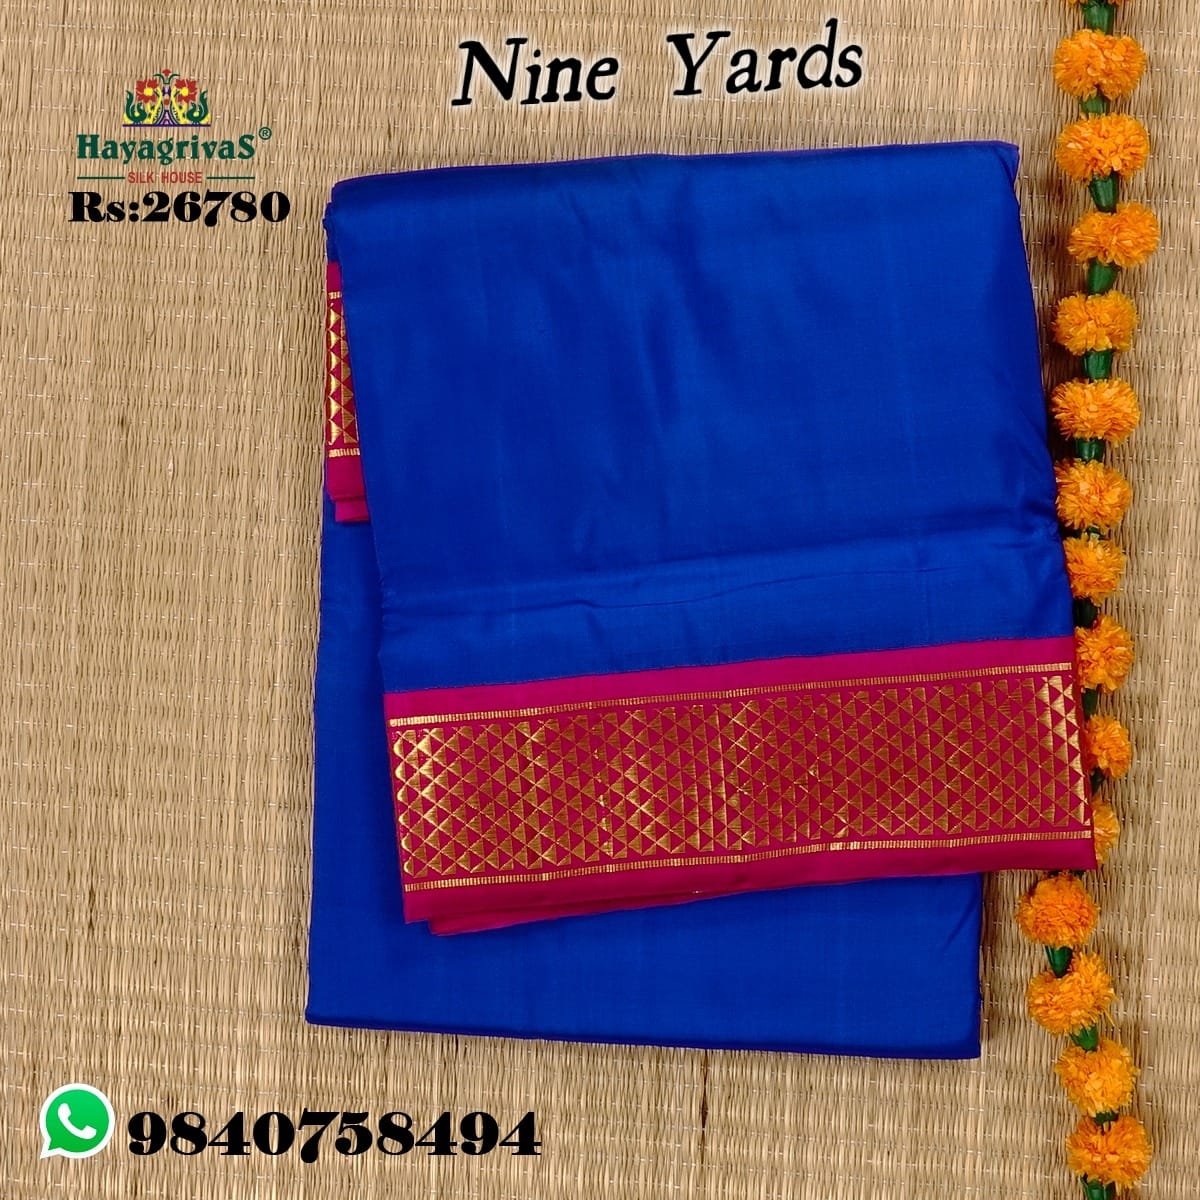 Lovely Madisar sarees which will make you stand out in all your special occasions! 

To book call 9840758494 

#9yards #10yards #tambrahm #iyer #iyengar #maidsar #mami #madisarmami #handloom #hayagrivas #silksarees #chennai